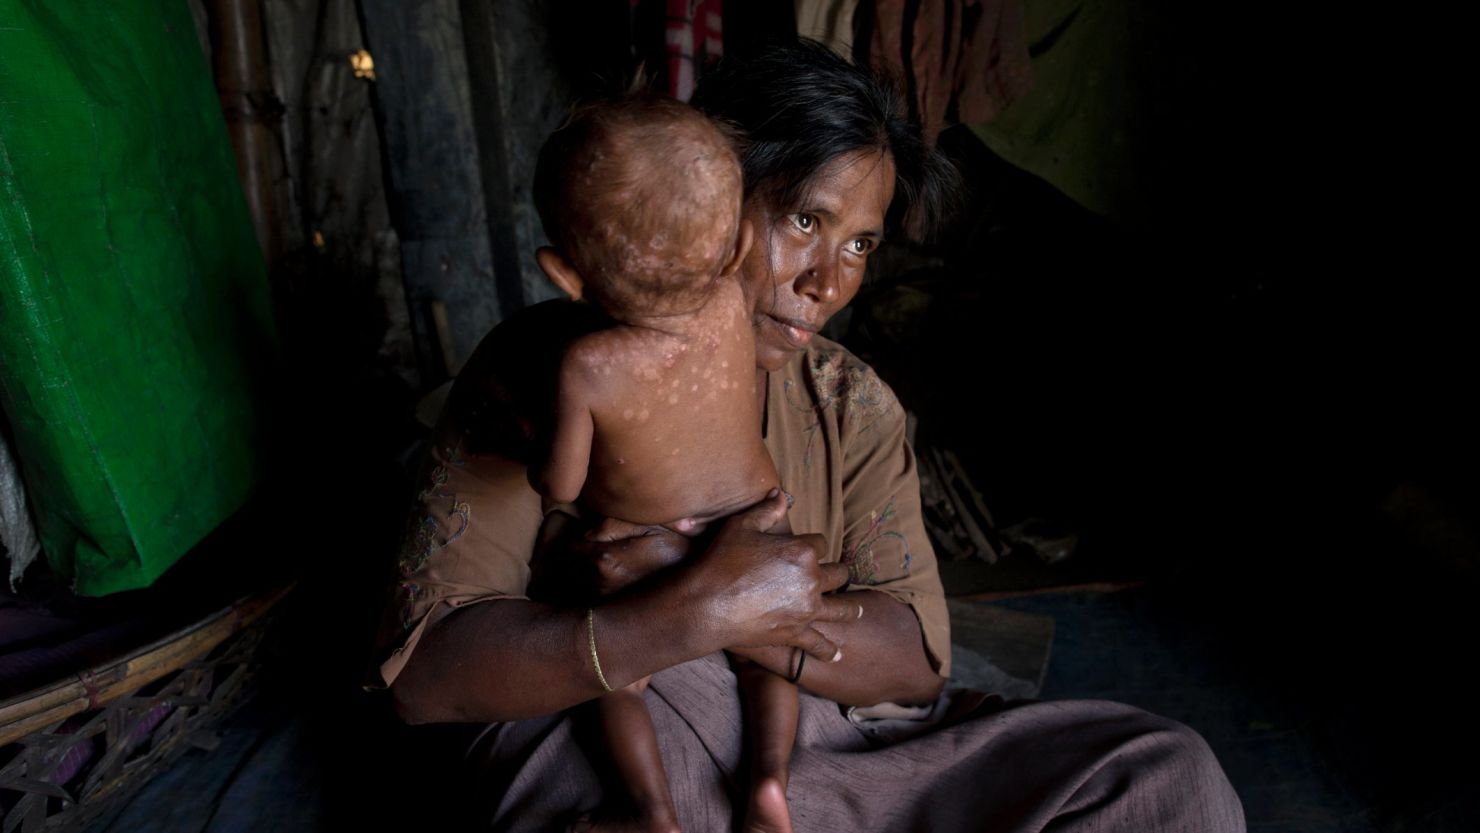 A Rohingya refugee holds her daughter who suffers from a skin disease at Dar Paing camp, Rakhine, Myanmar.